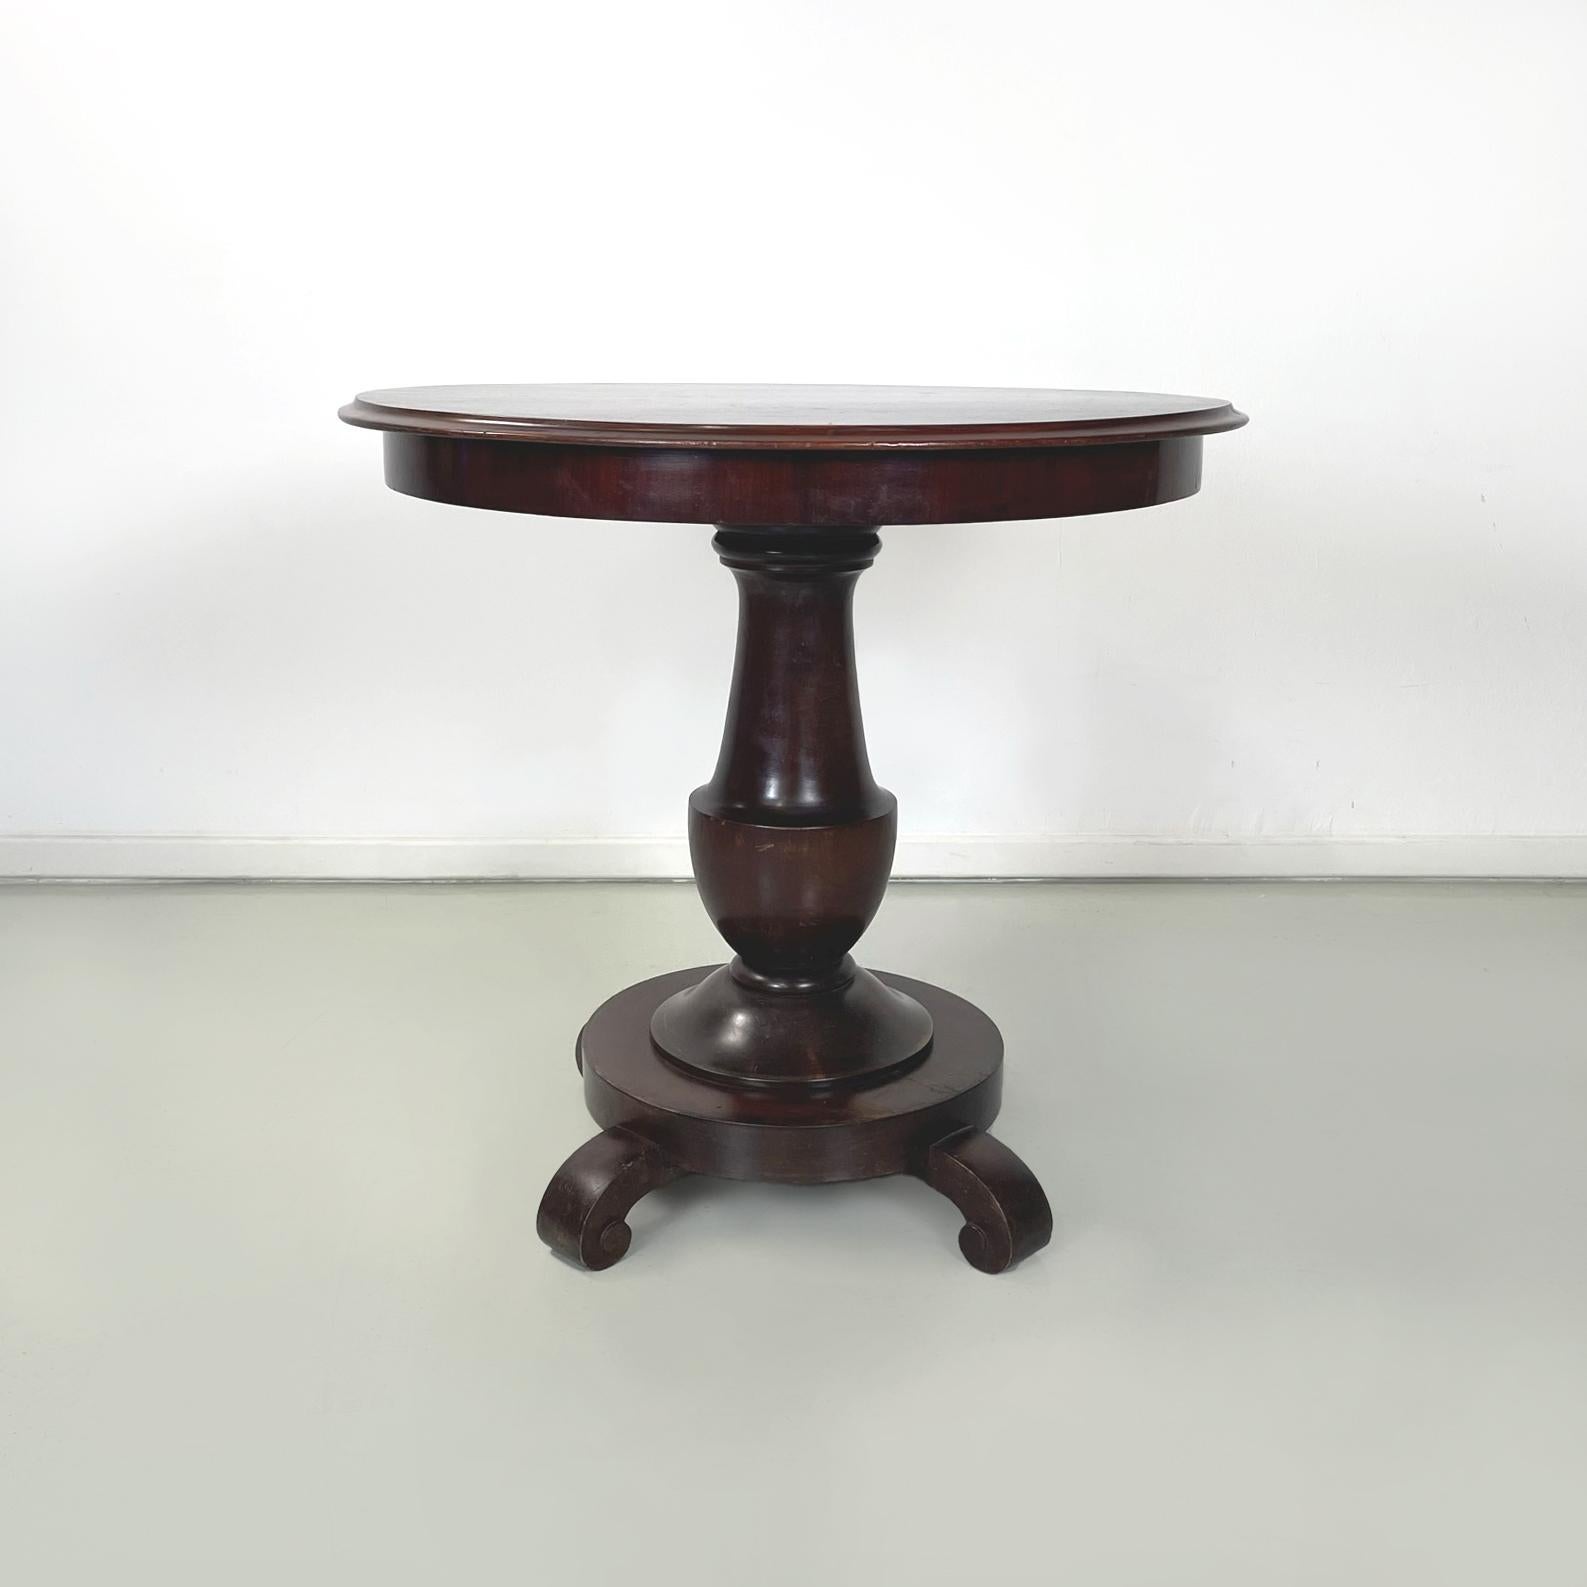 Italian antique walnut round and finely worked wood dining table, 1800s    
Antique dining table with round top, entirely in dark walnut wood. The central structure and the curly legs are turned and finely worked.
1800s of Italian manufacture.
Good